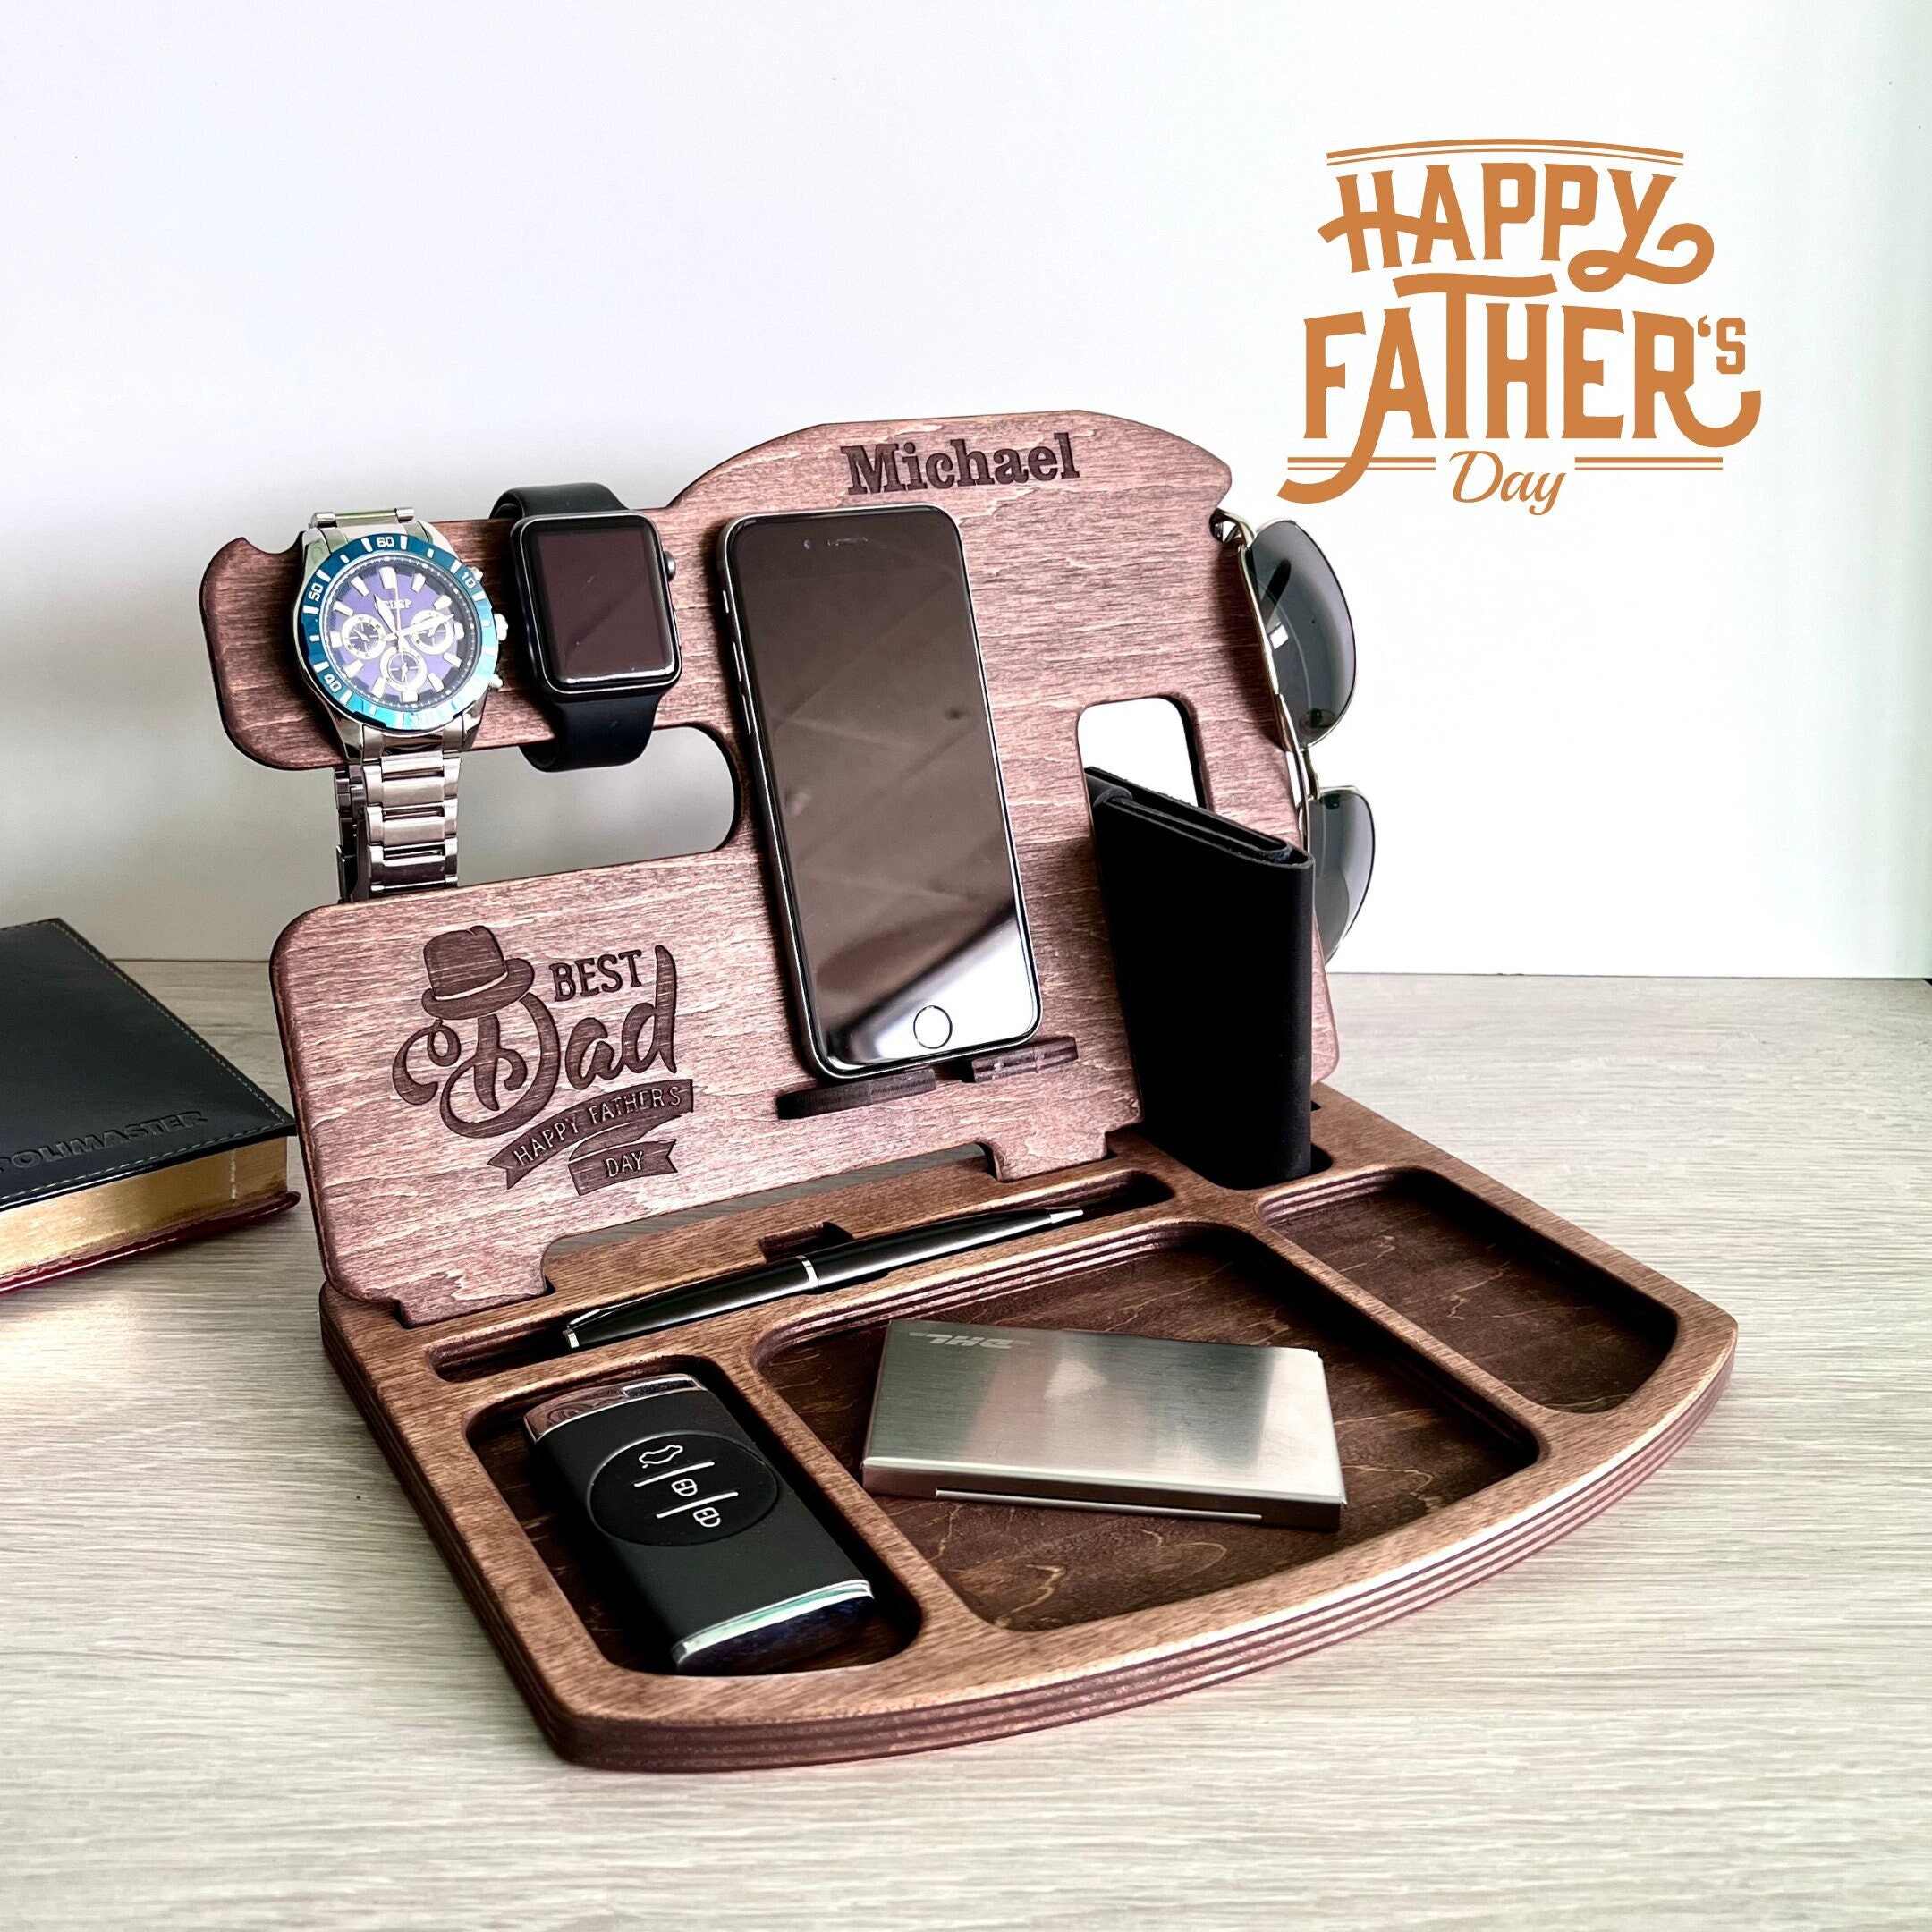 Dad Birthday Gift, Dads Gift, Gifts for Dad, Birthday for Dad, Dads  Birthday Gift, Dads Gifts 